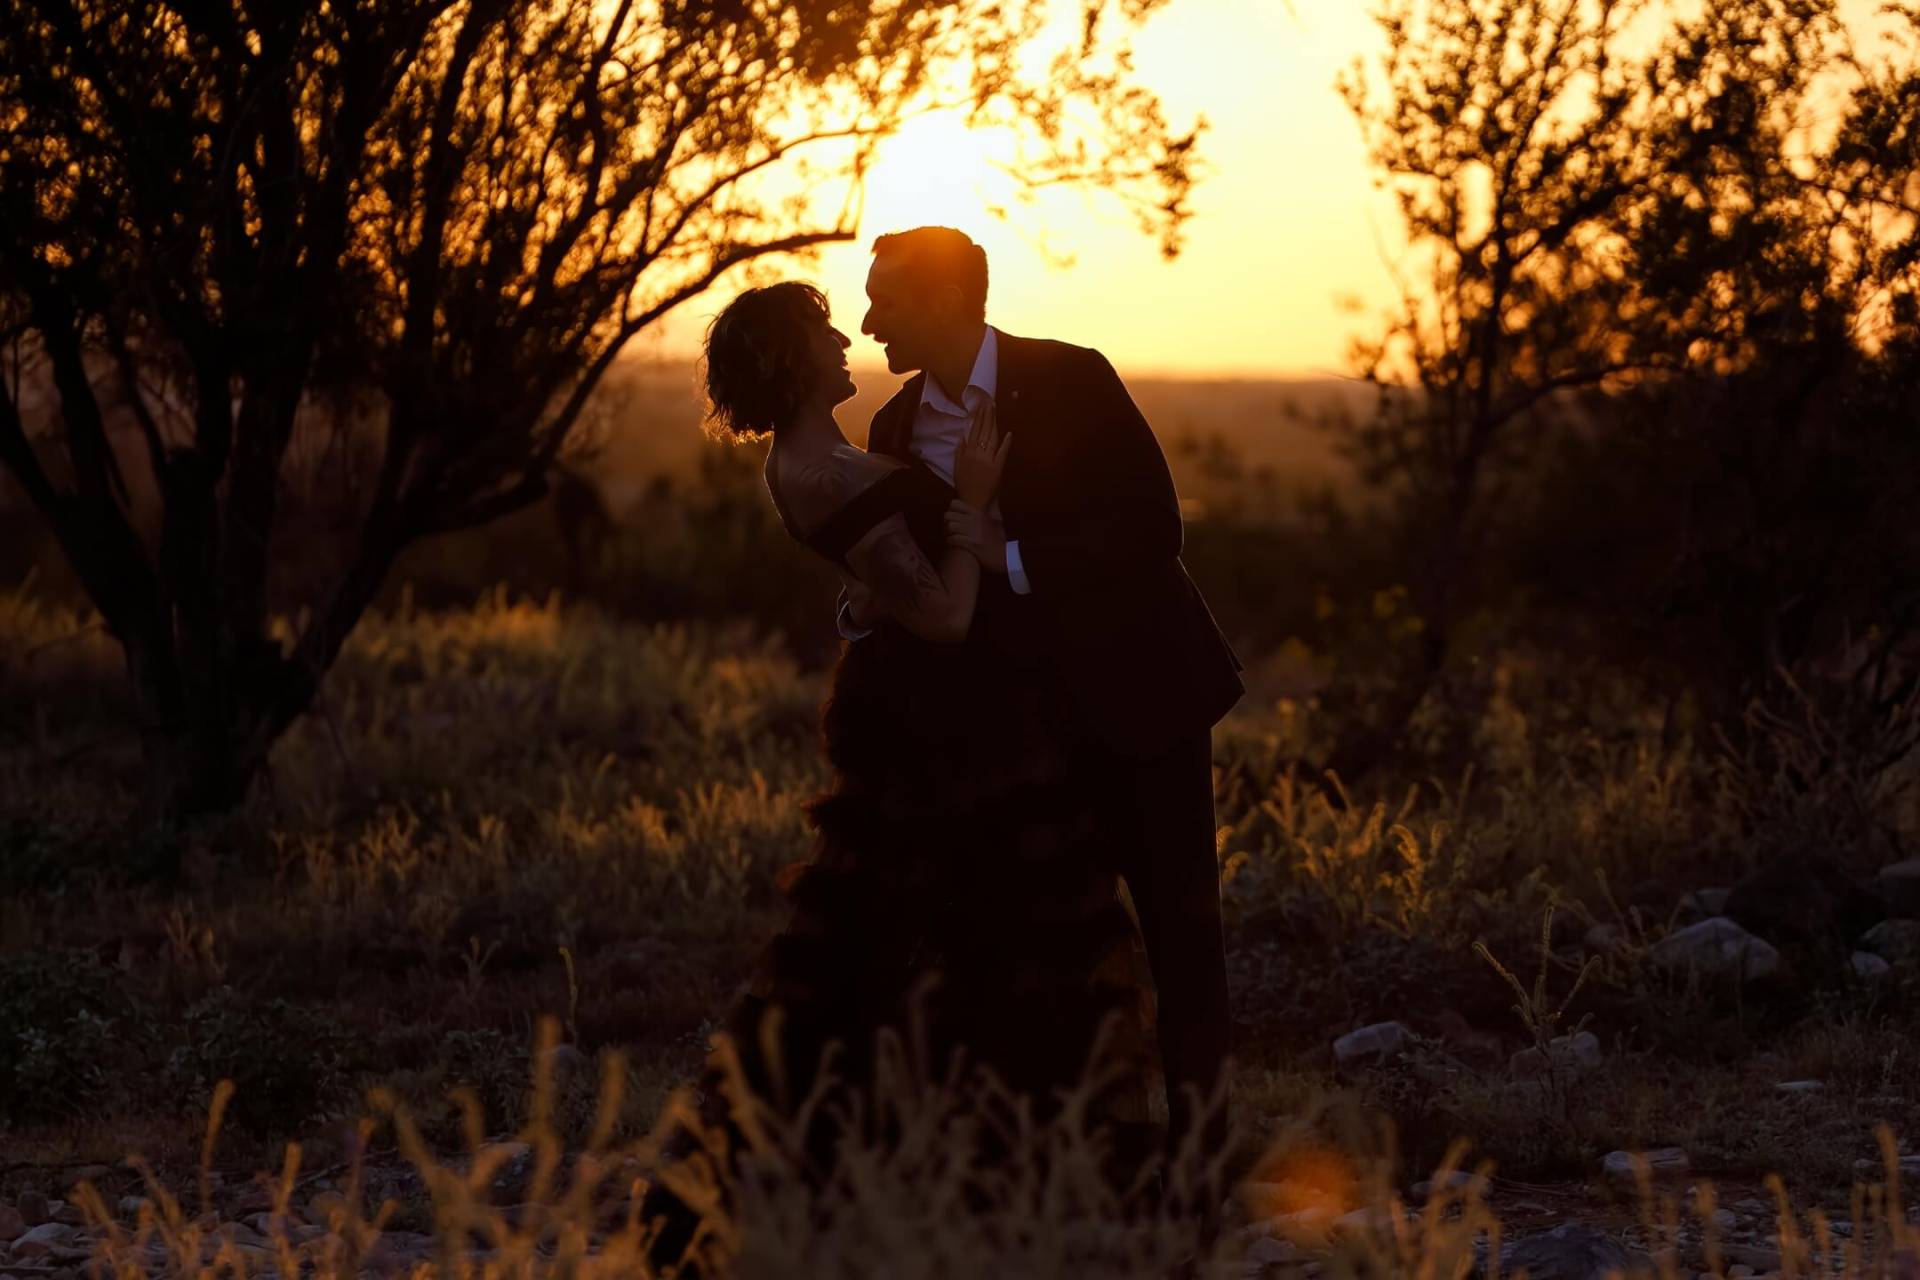 Dressed Up Couple in a Romantic Embrace About to Kiss with the Sunset Behind Them